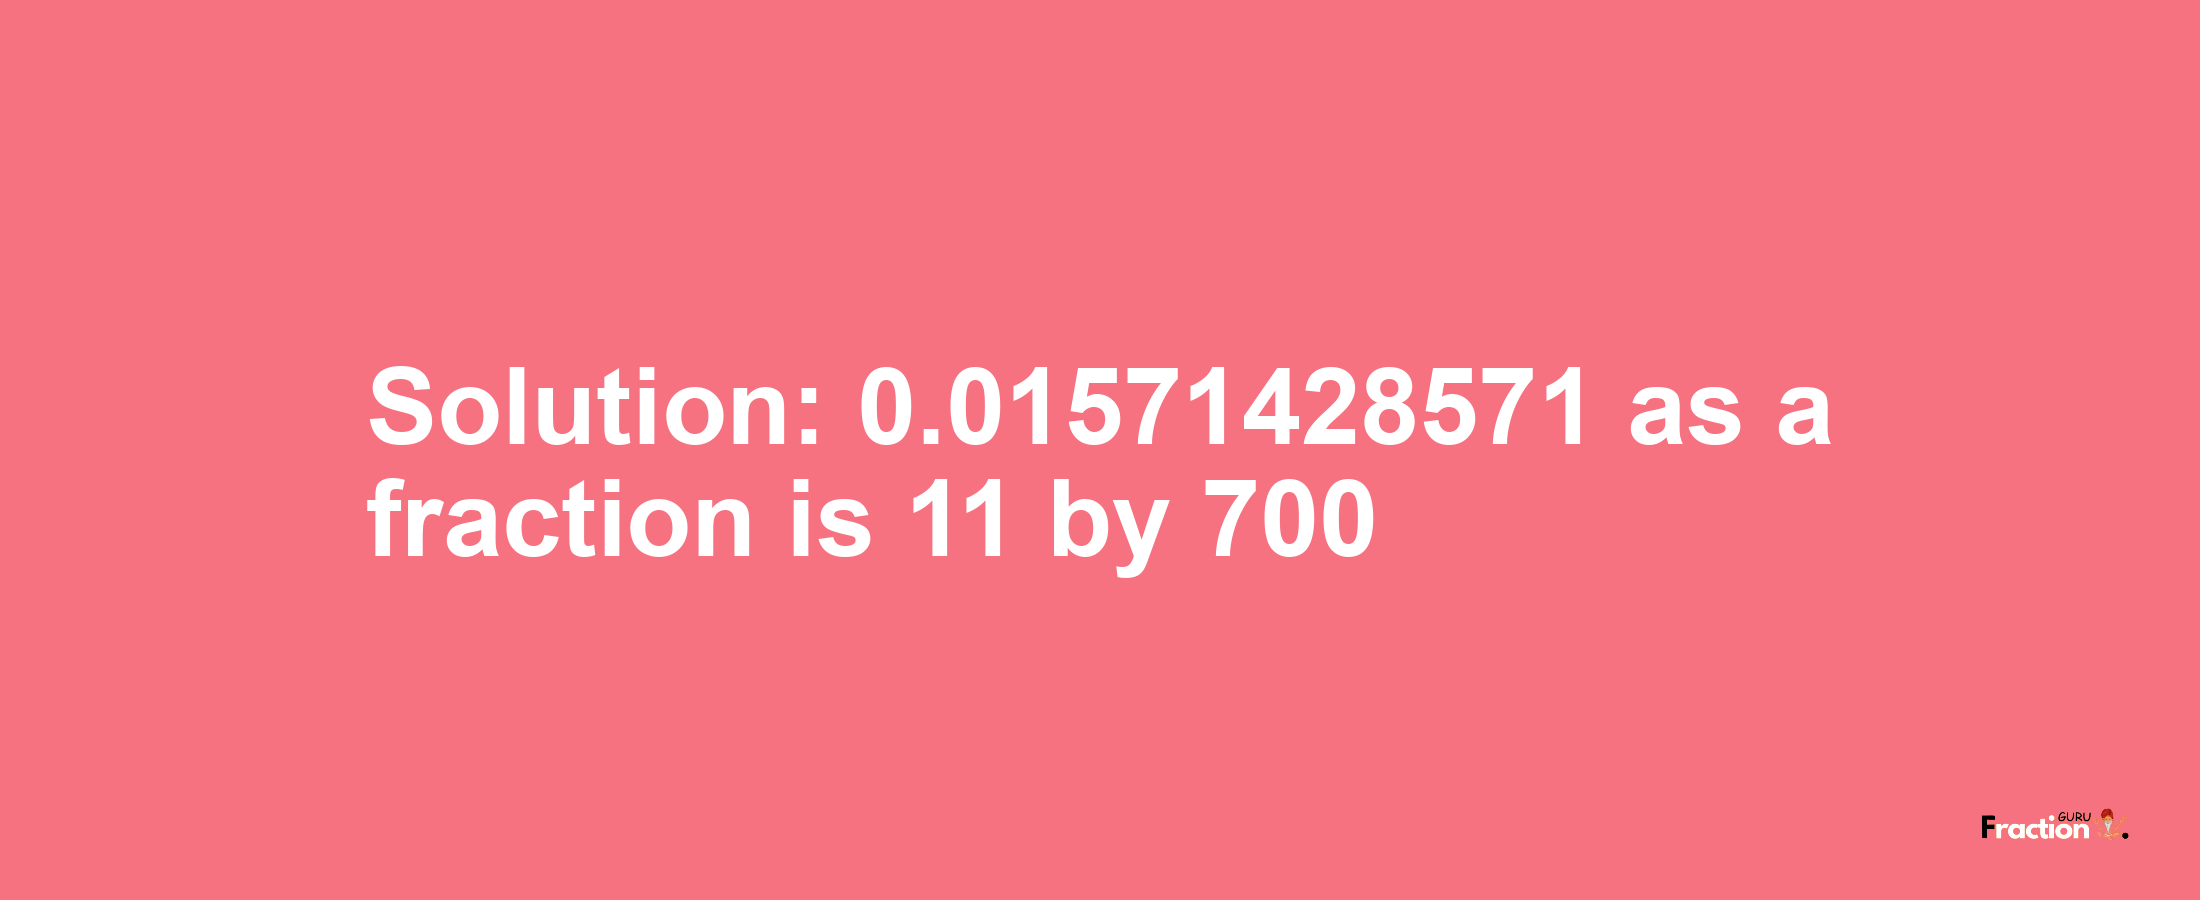 Solution:0.01571428571 as a fraction is 11/700